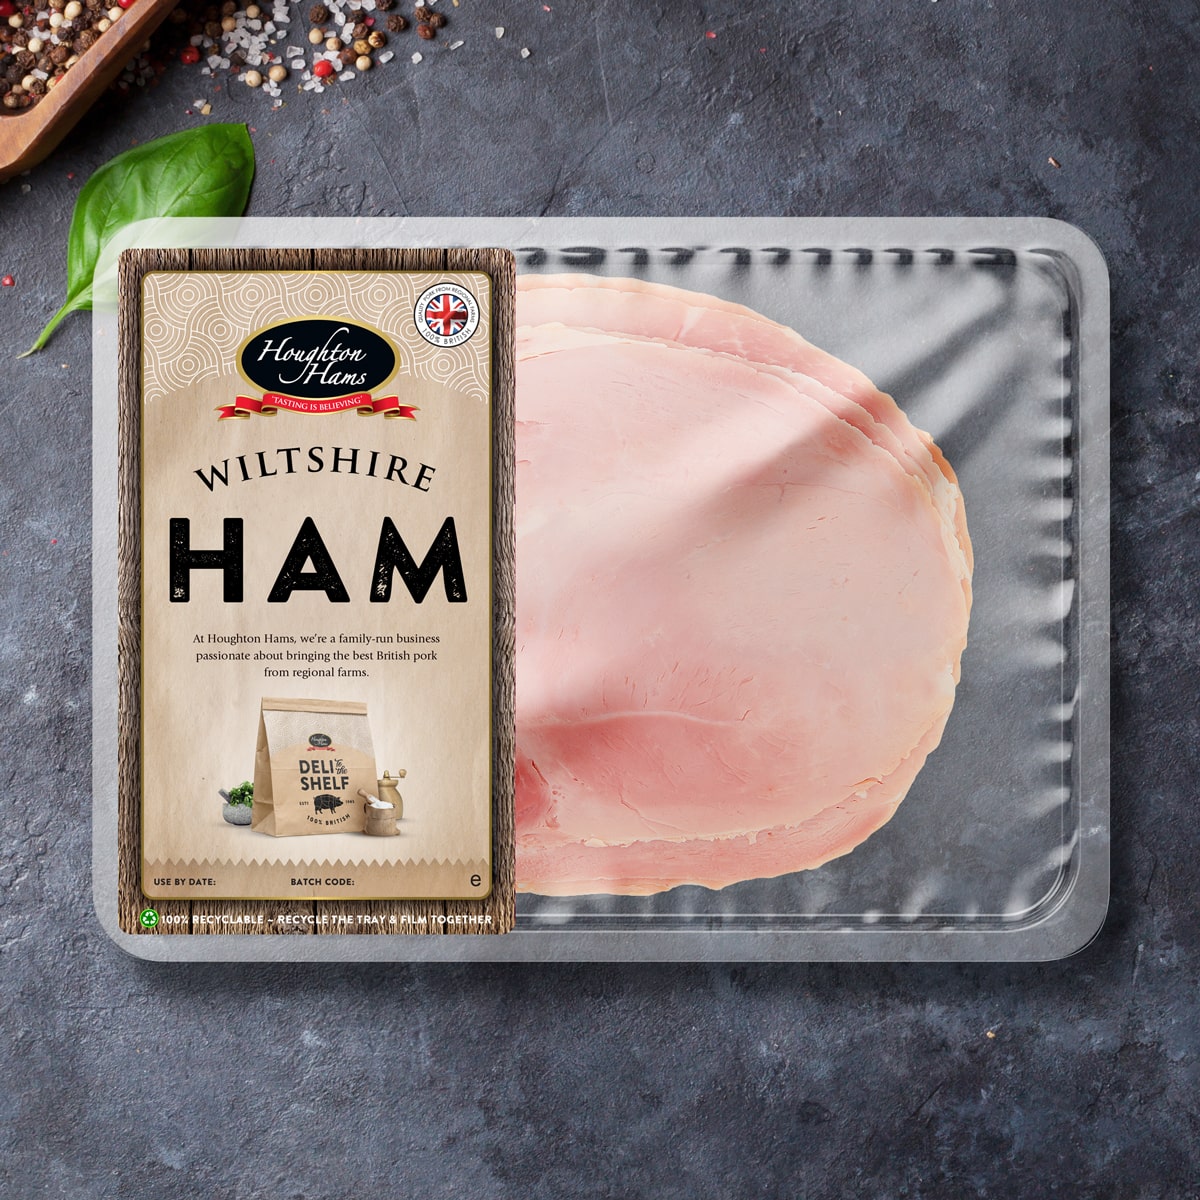 What is a Wiltshire Ham?